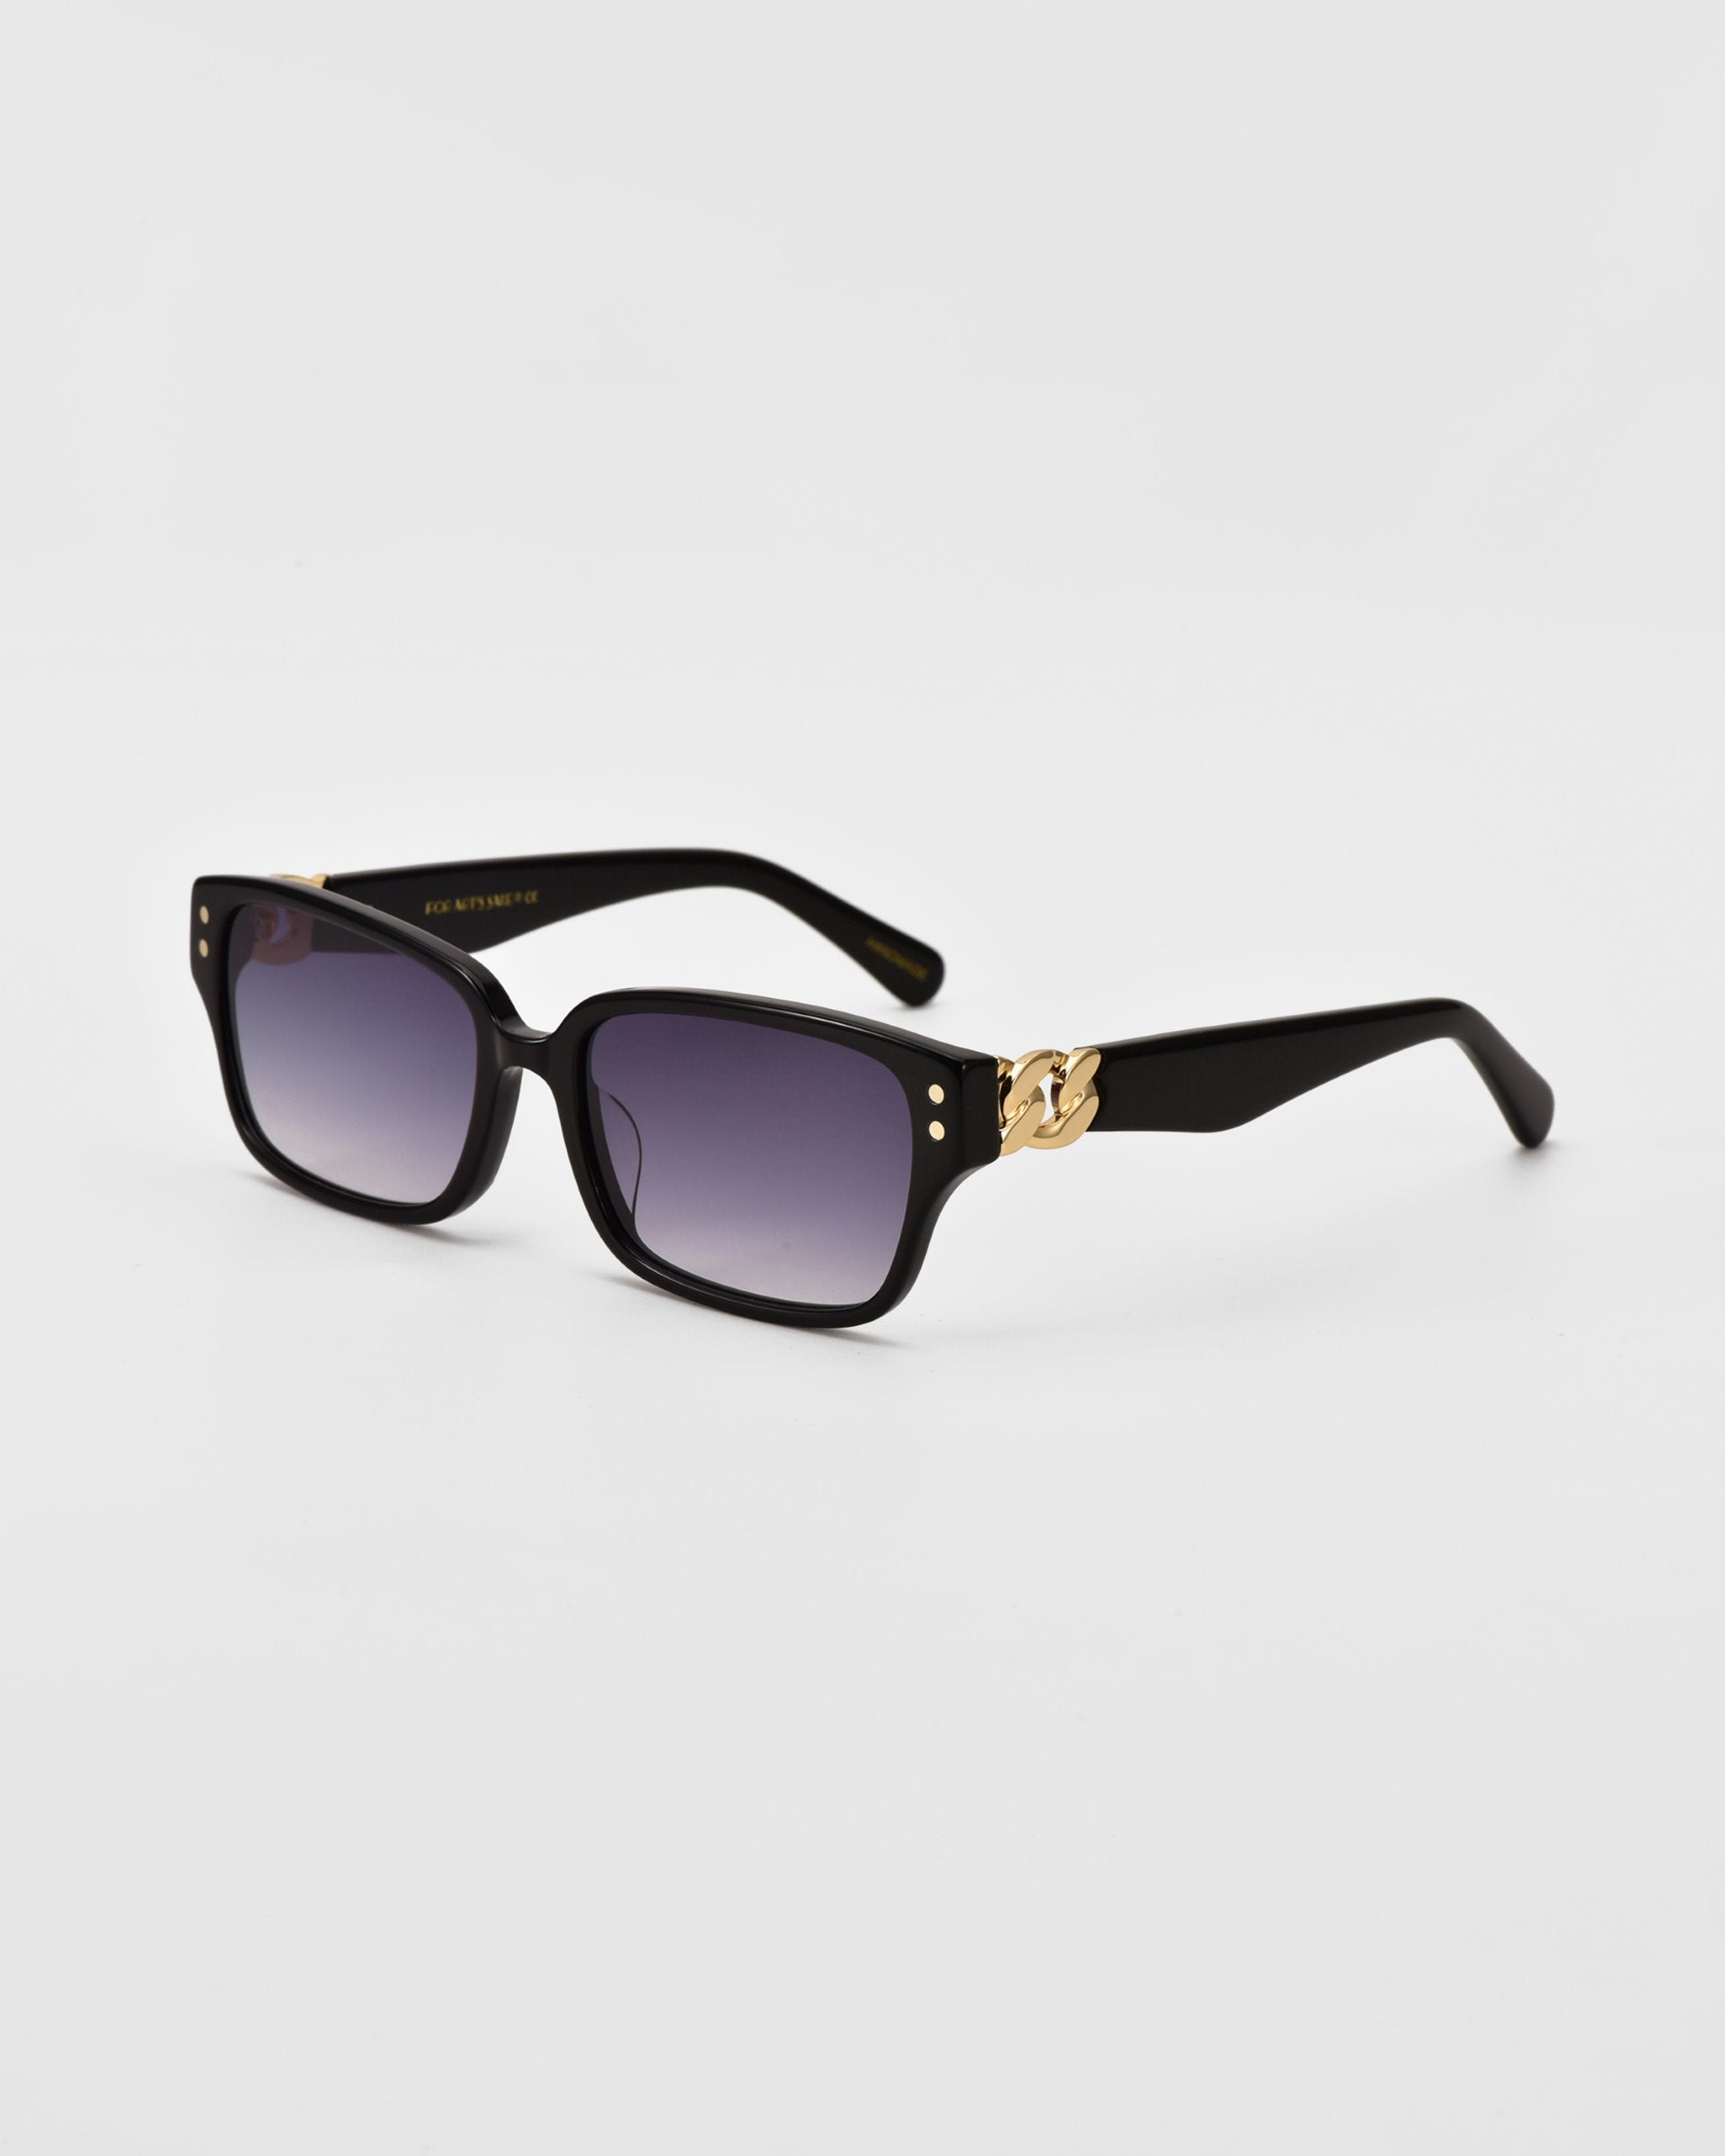 A pair of black rectangular For Art's Sake® Zenith sunglasses with dark tinted lenses is displayed against a plain white background. The handcrafted acetate sunglasses feature gold detailing on the temples near the hinges.